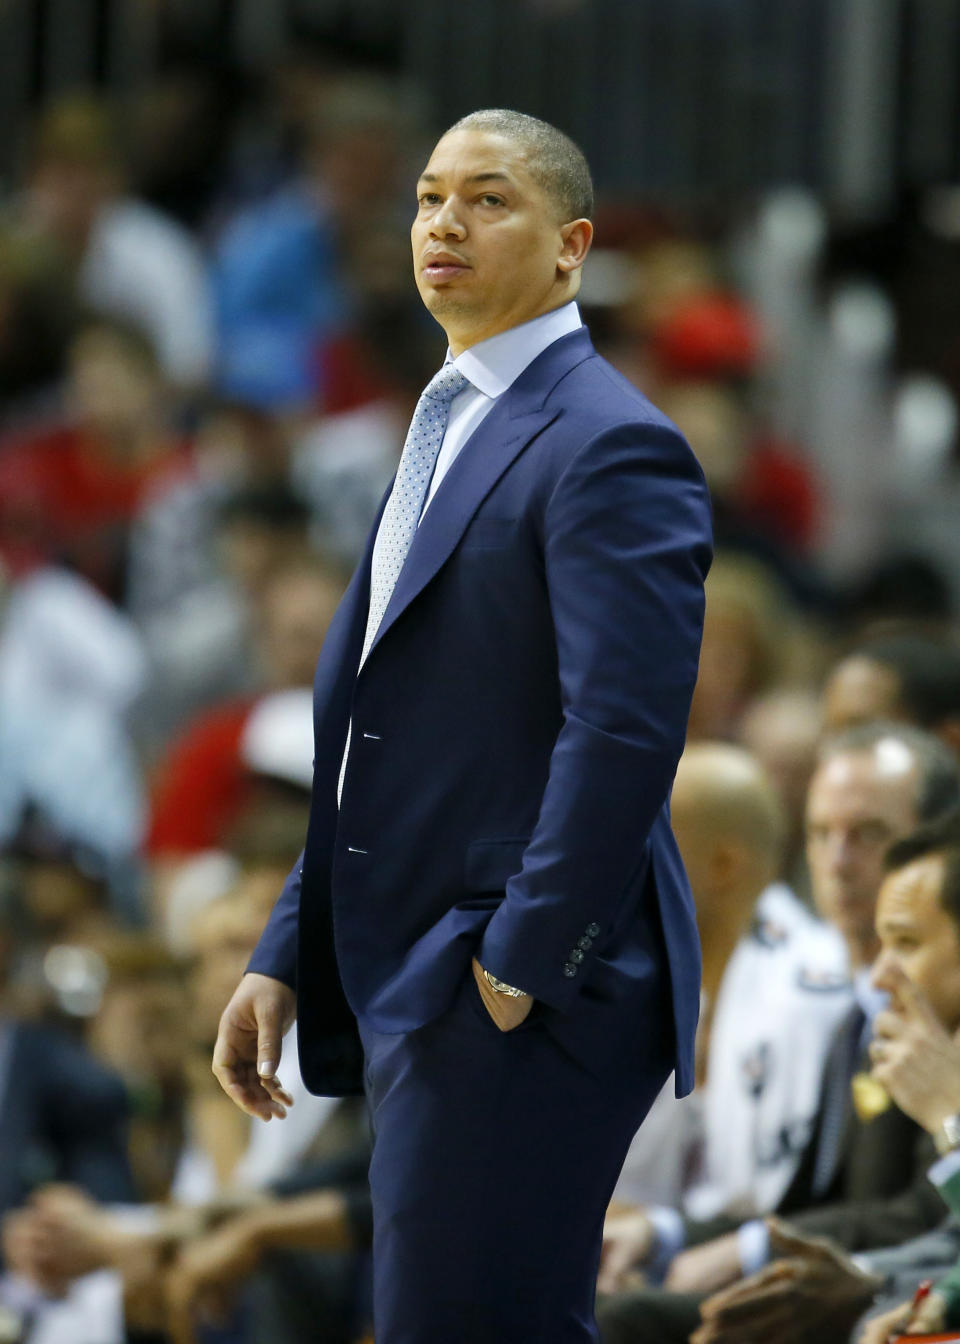 Cleveland Cavaliers head coach Tyronn Lue watches on in the second half of an NBA basketball game between the Cleveland Cavaliers and Atlanta Hawks on Sunday, April 9, 2017, in Atlanta. The Hawks won in overtime 126-125. (AP Photo/Todd Kirkland)